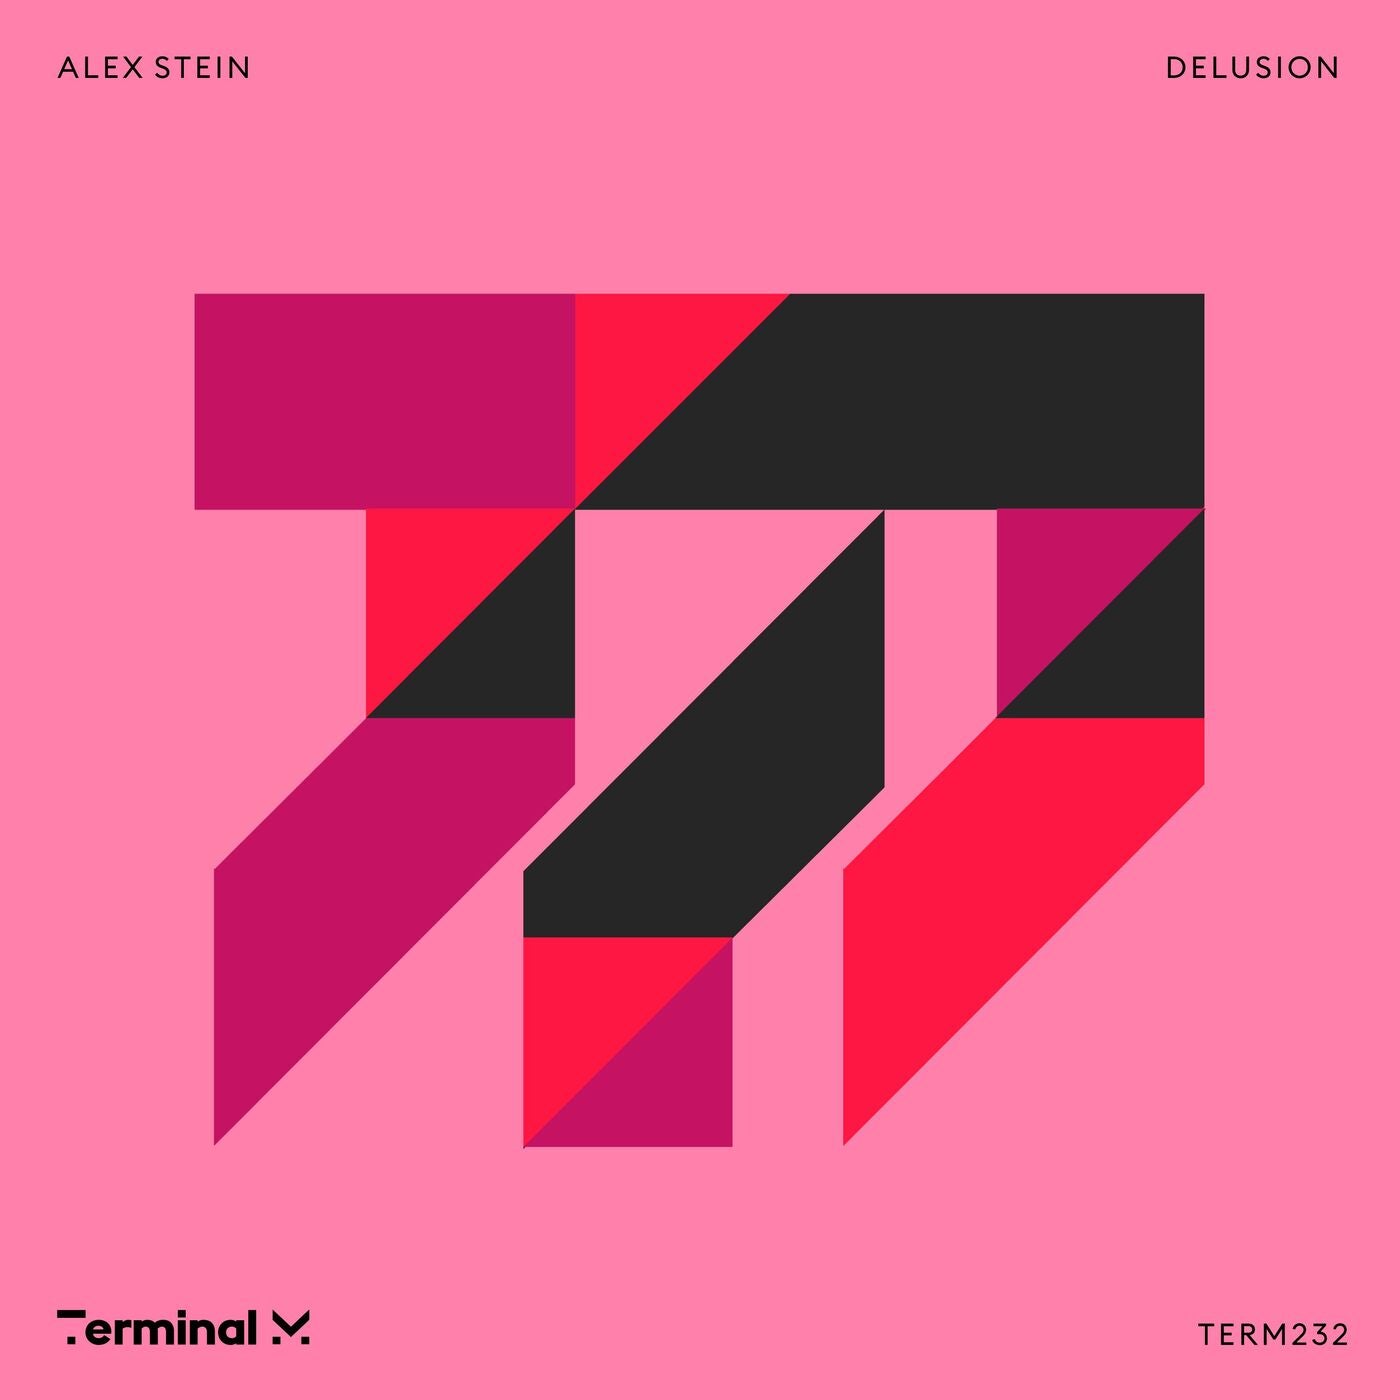 image cover: Alex Stein - Delusion on Terminal M